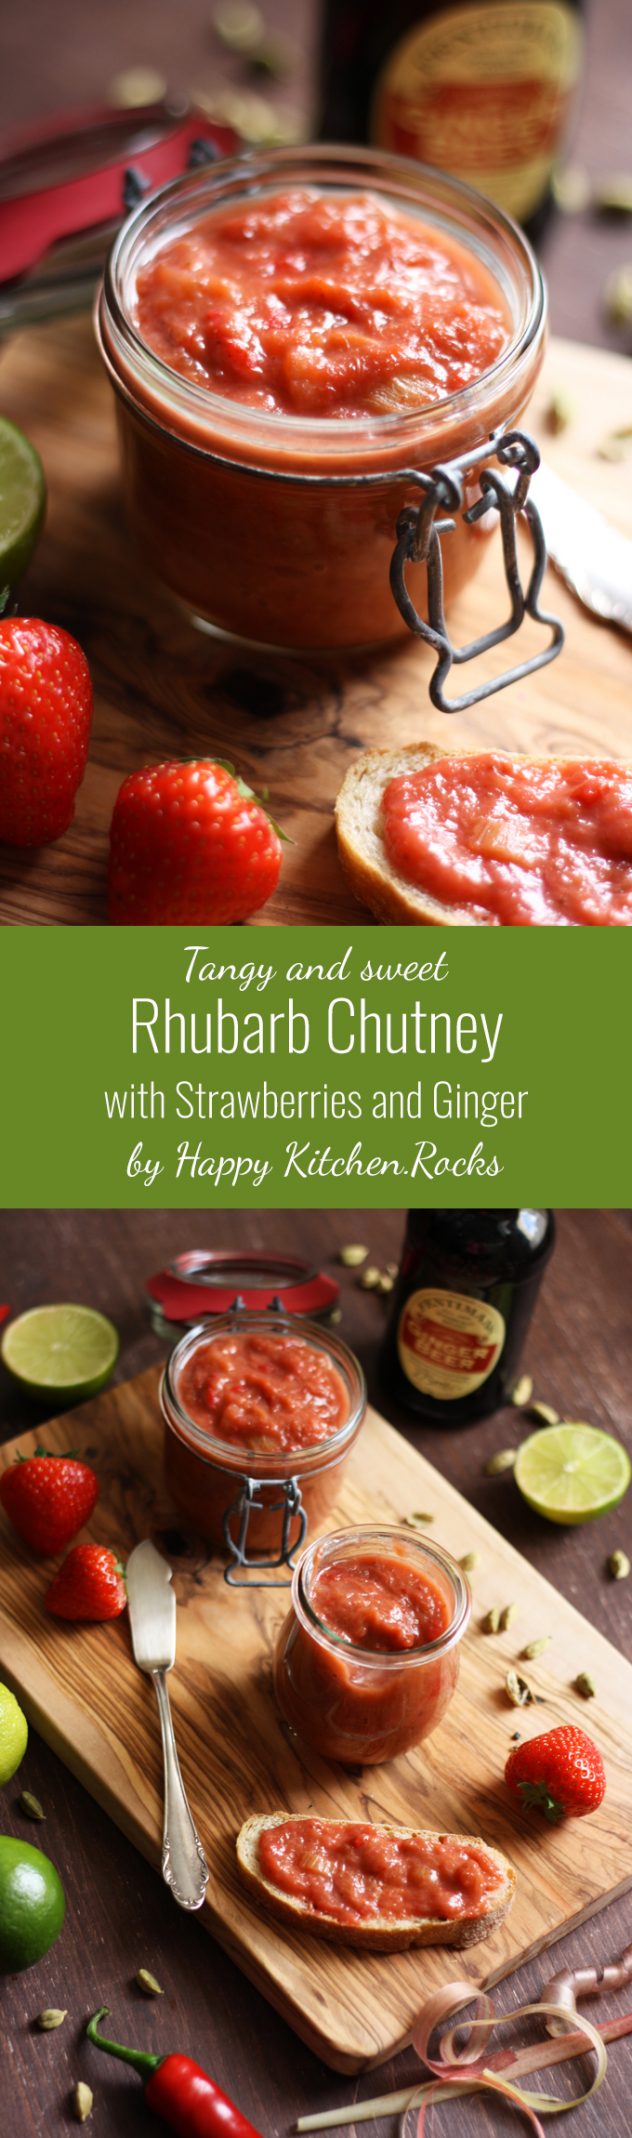 This tangy and sweet Indian rhubarb chutney with strawberries and ginger is packed with nutrients, while being vegan, vegetarian, low carb, paleo, gluten-free and incredibly delicious! Perfect condiment for spring and summer BBQ!